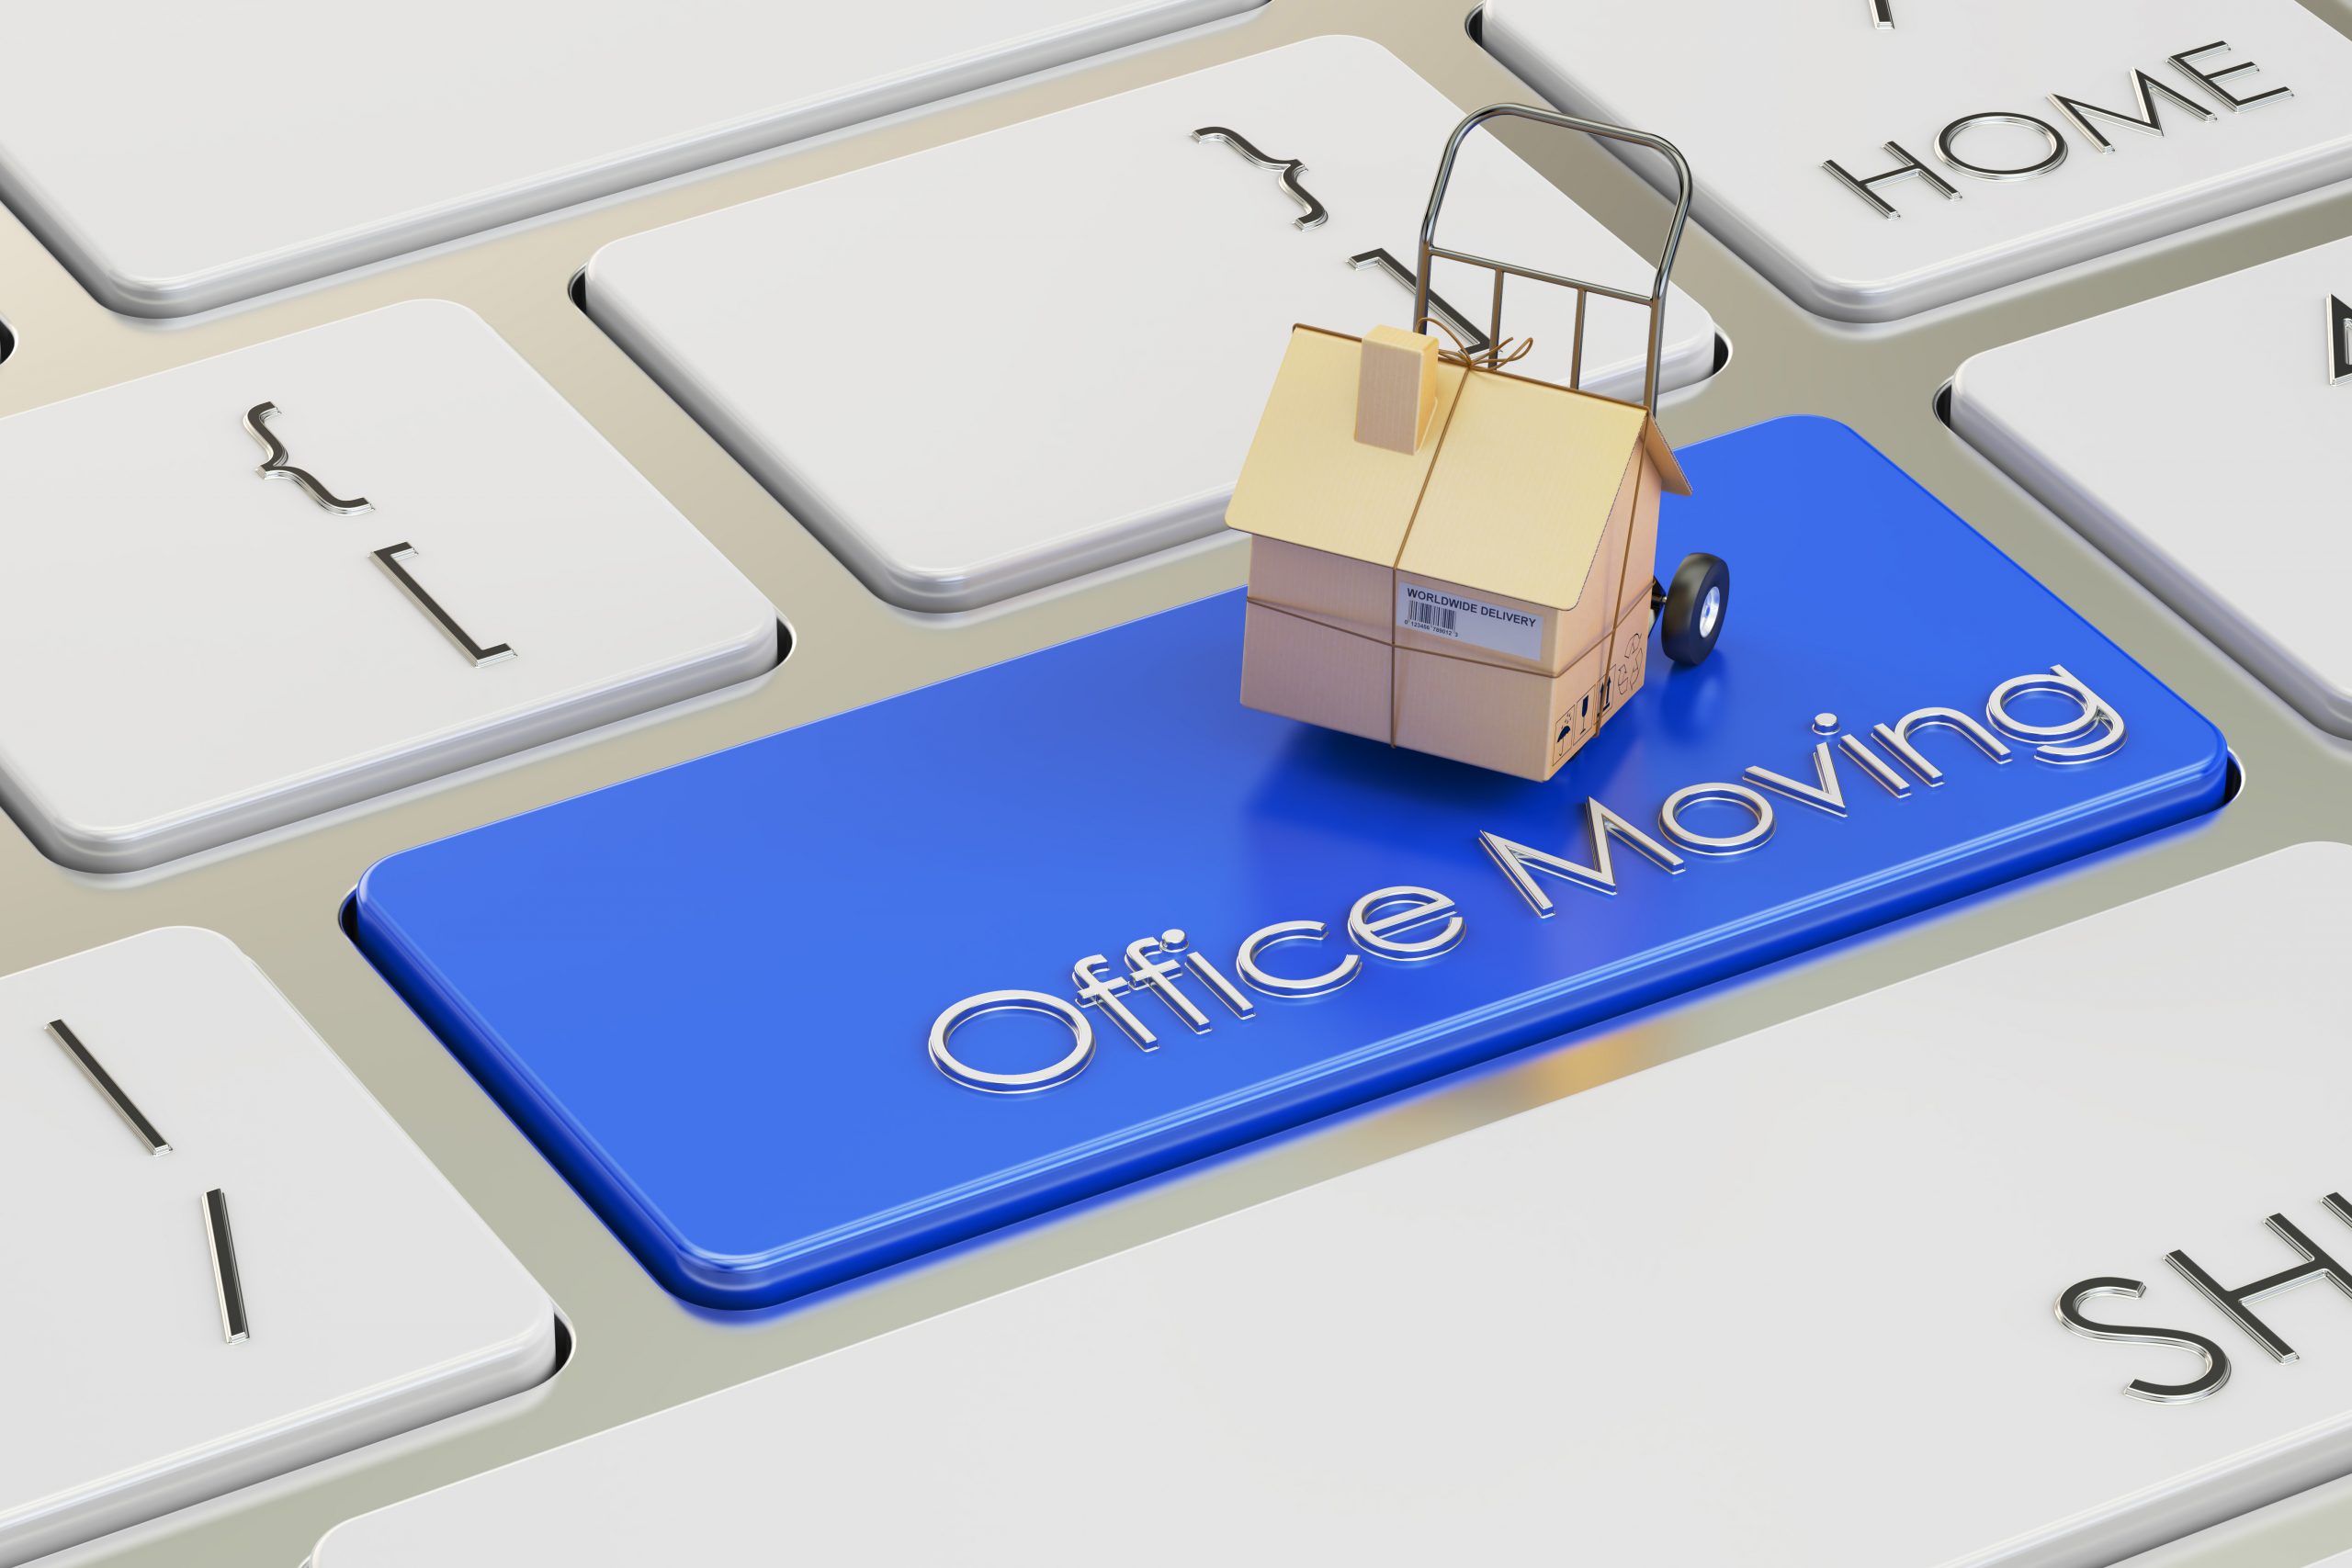 How to Prepare for an Office Move in 4 Simple Steps